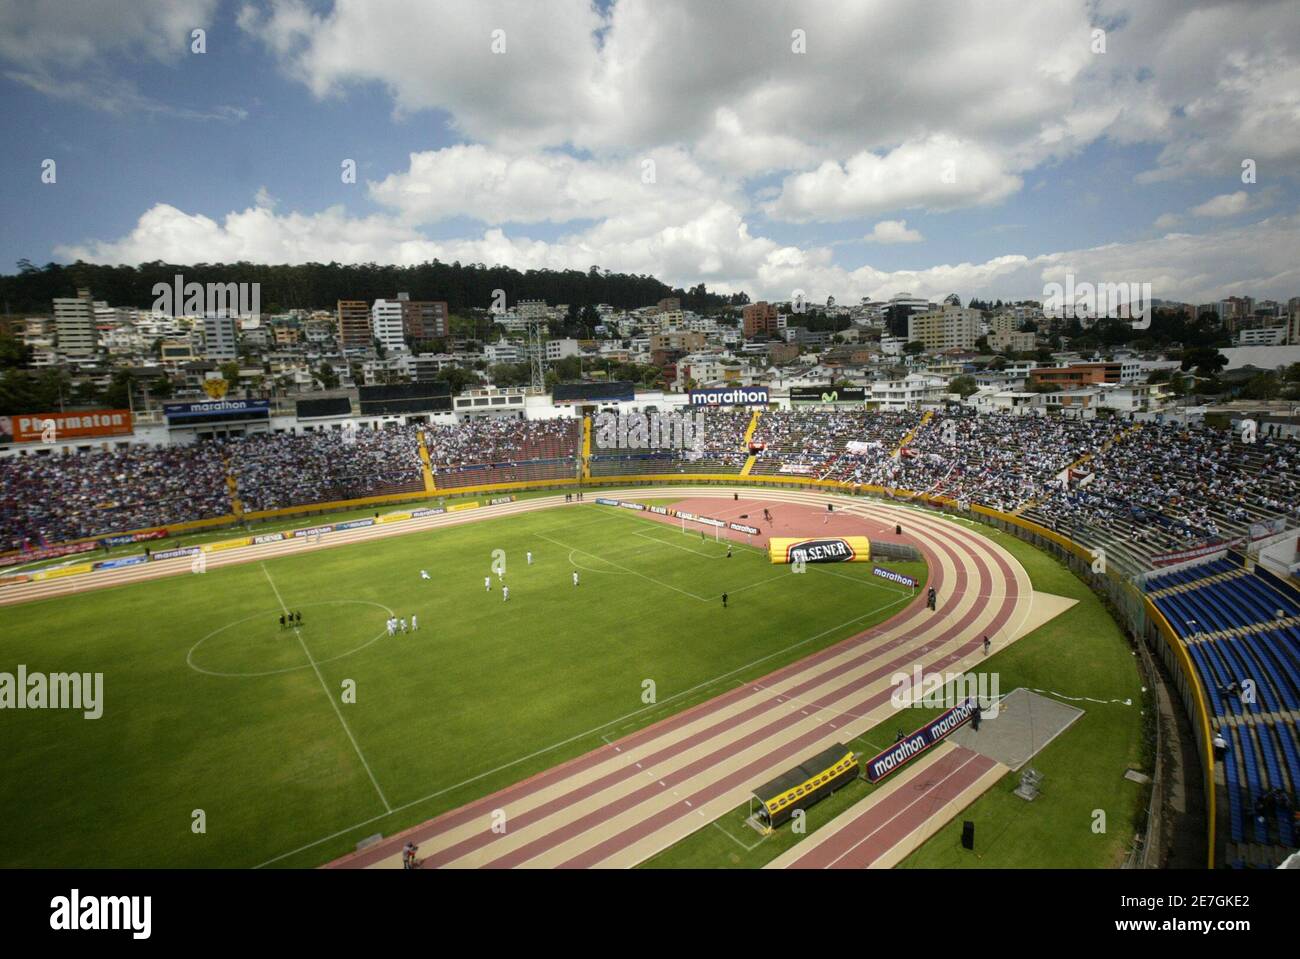 An overview of Atahualpa Stadium in Quito where Ecuador traditionally plays  its World Cup qualifying matches, at slightly over 2,800 meters (9,186 feet)  above sea level, May 28, 2007. No international soccer